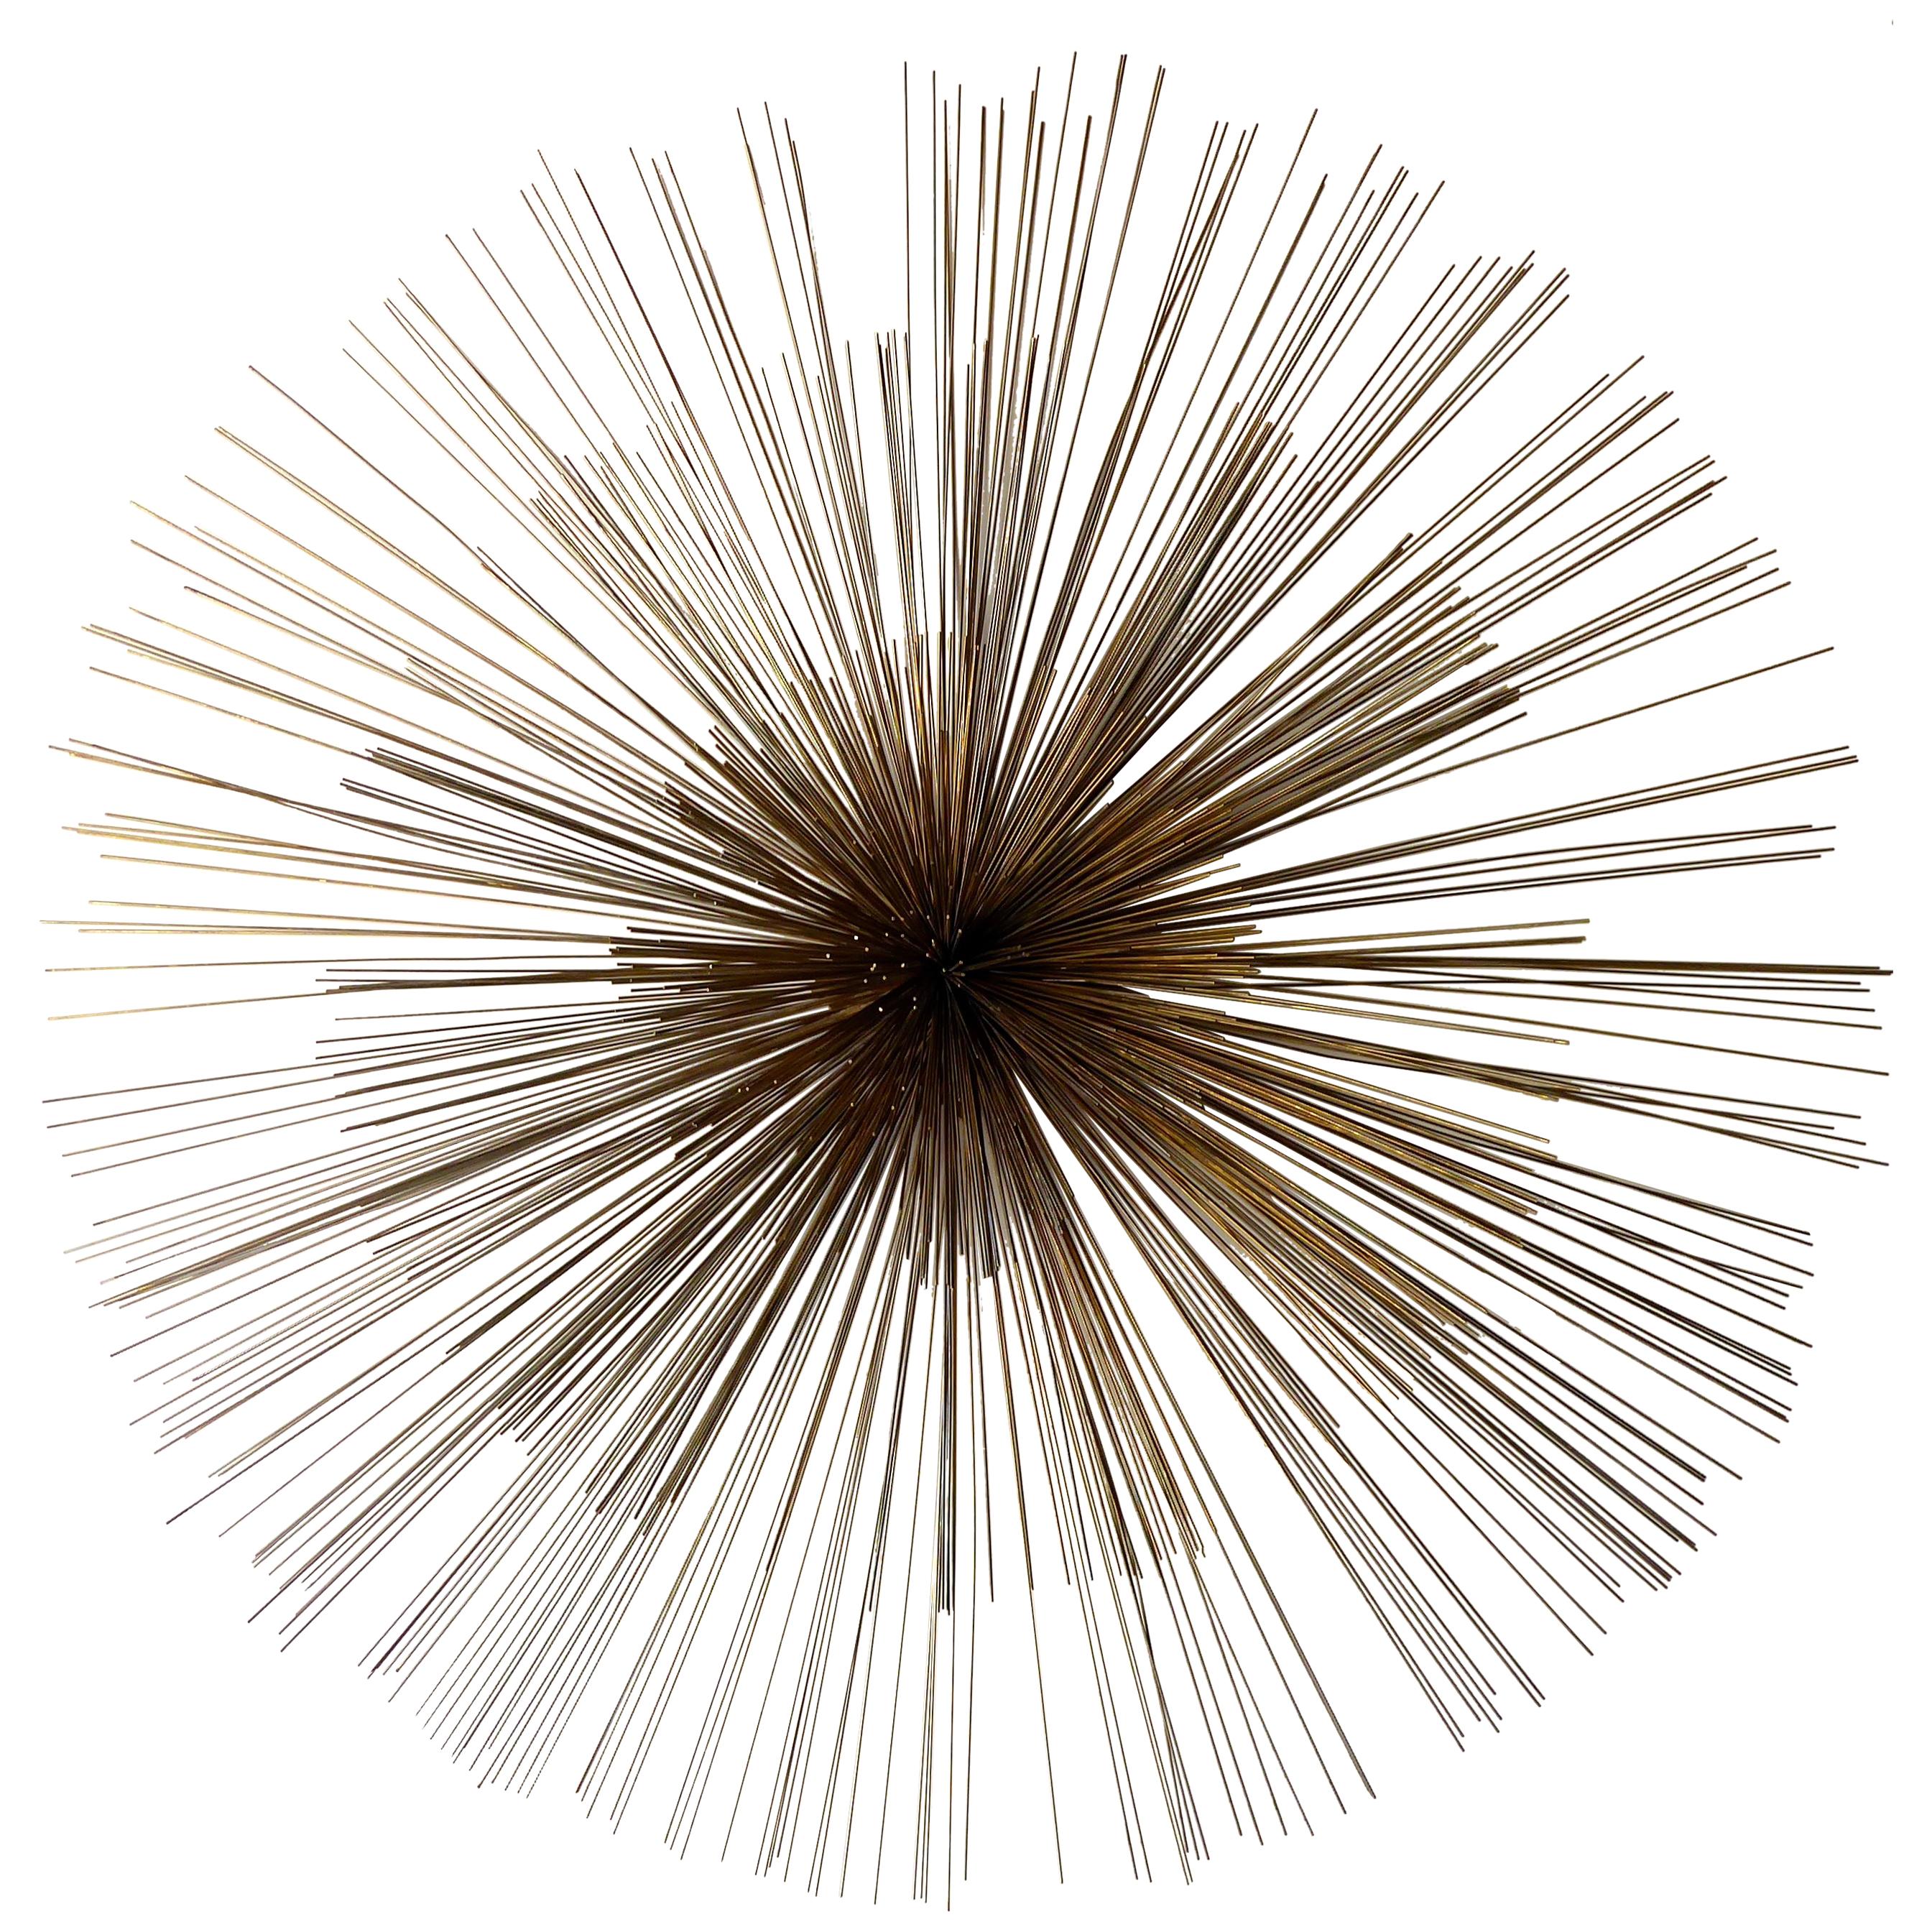 Sea Urchin Wall Sculpture by Artisan House or Curtis Jere